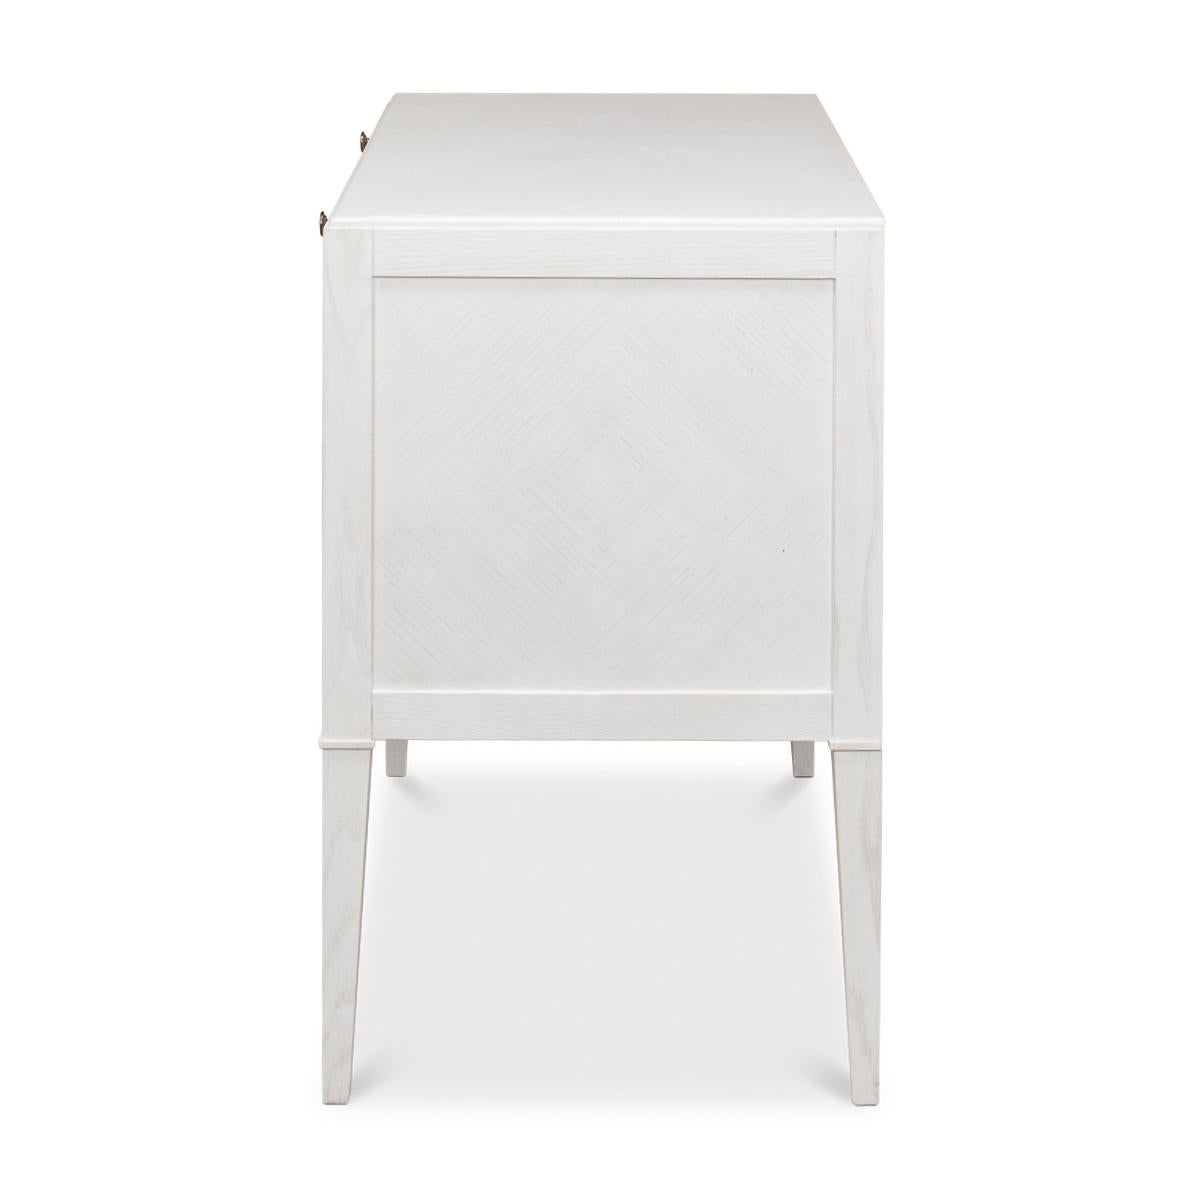 Contemporary Transitional Painted Oak Dresser, Working White For Sale